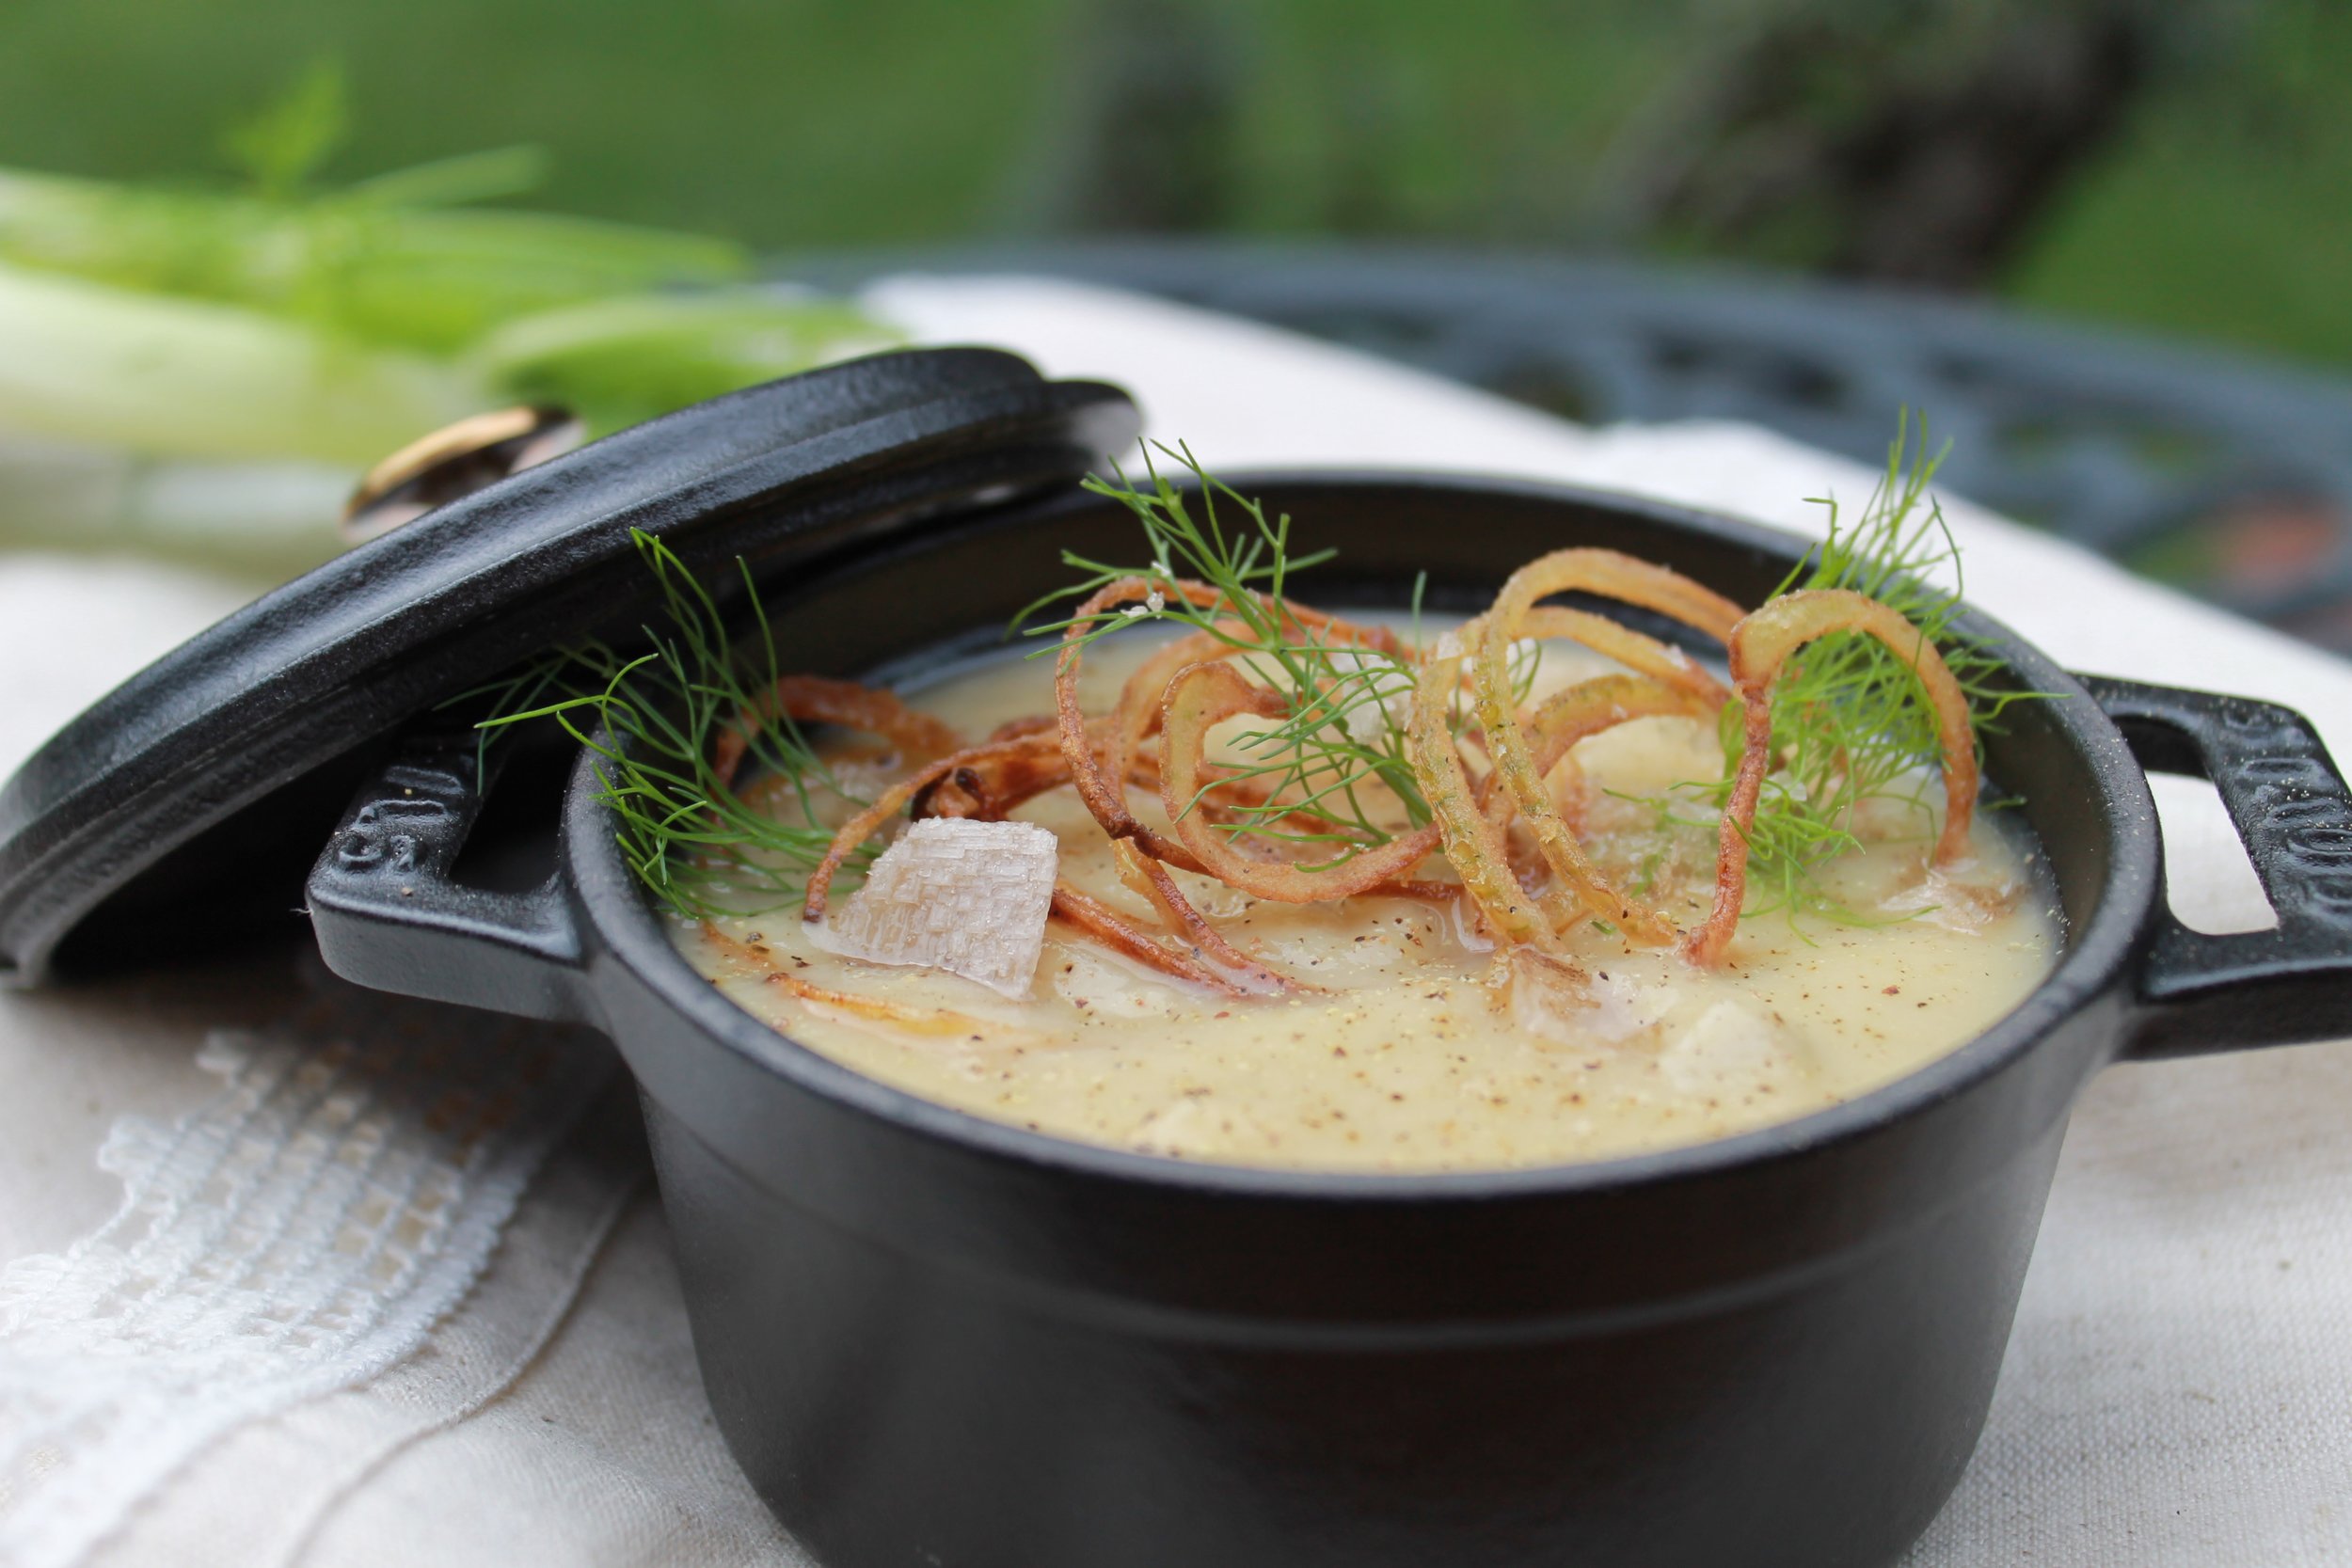 Soup in mini cocotte, garnished with crispy shallots, fennel fronts and flaky sea salt on a beige linen in an outdoor setting.